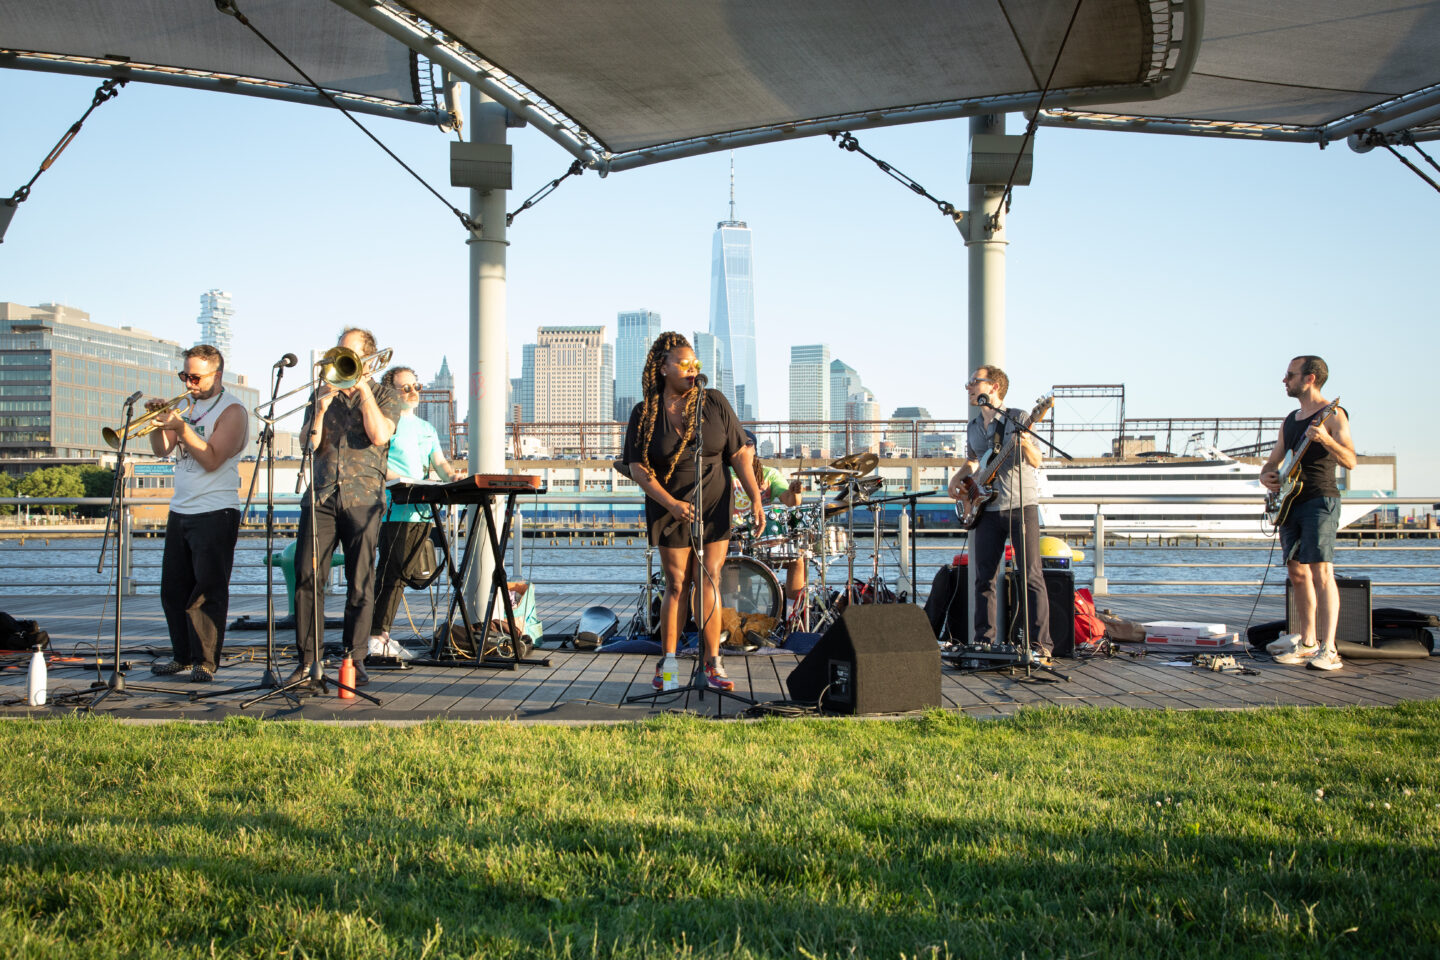 People's Champs performing at Pier 45 during a Sunset on the Hudson concert